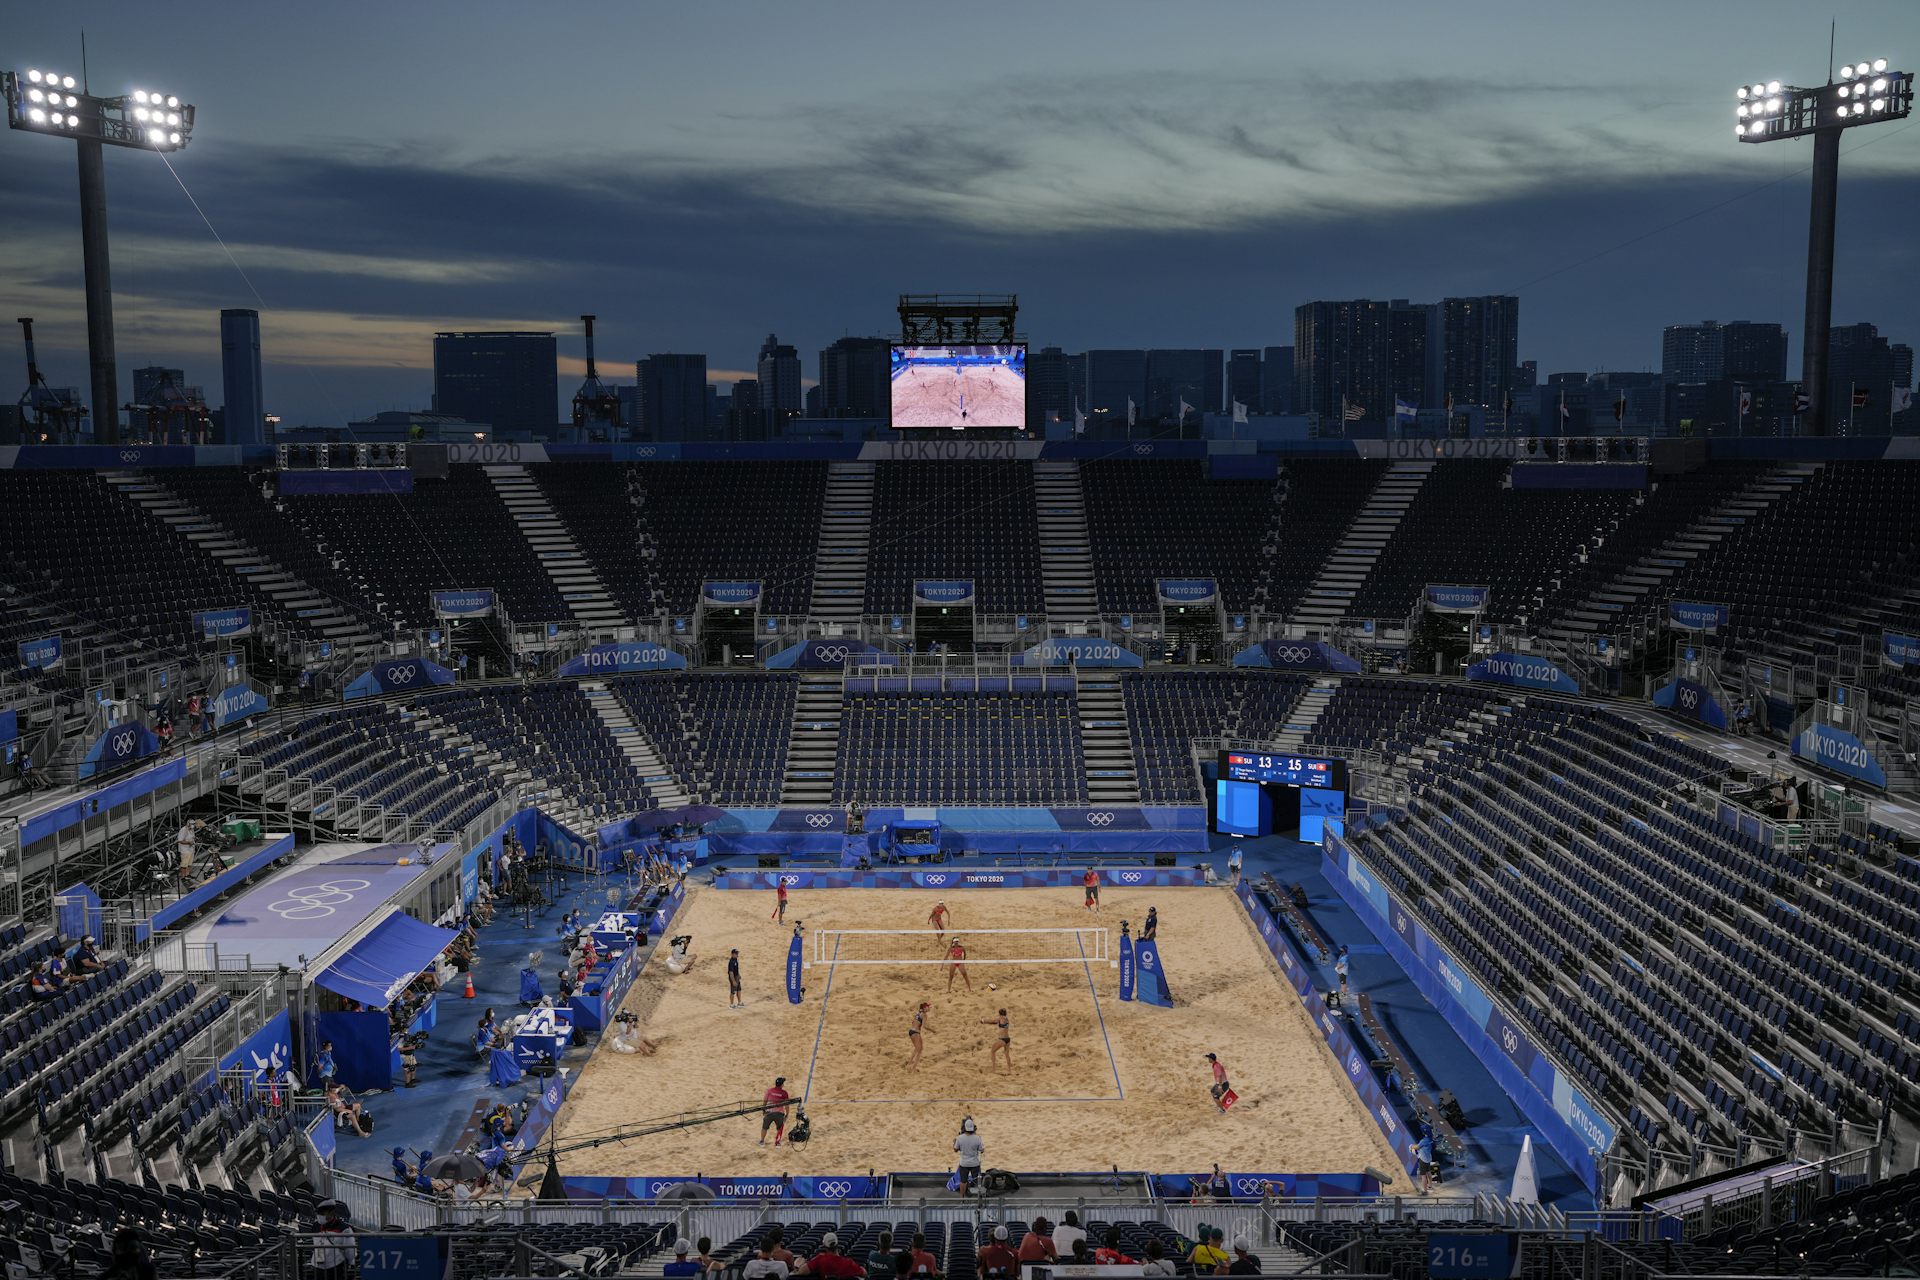 A beach volleyball game taking place in an empty stadium